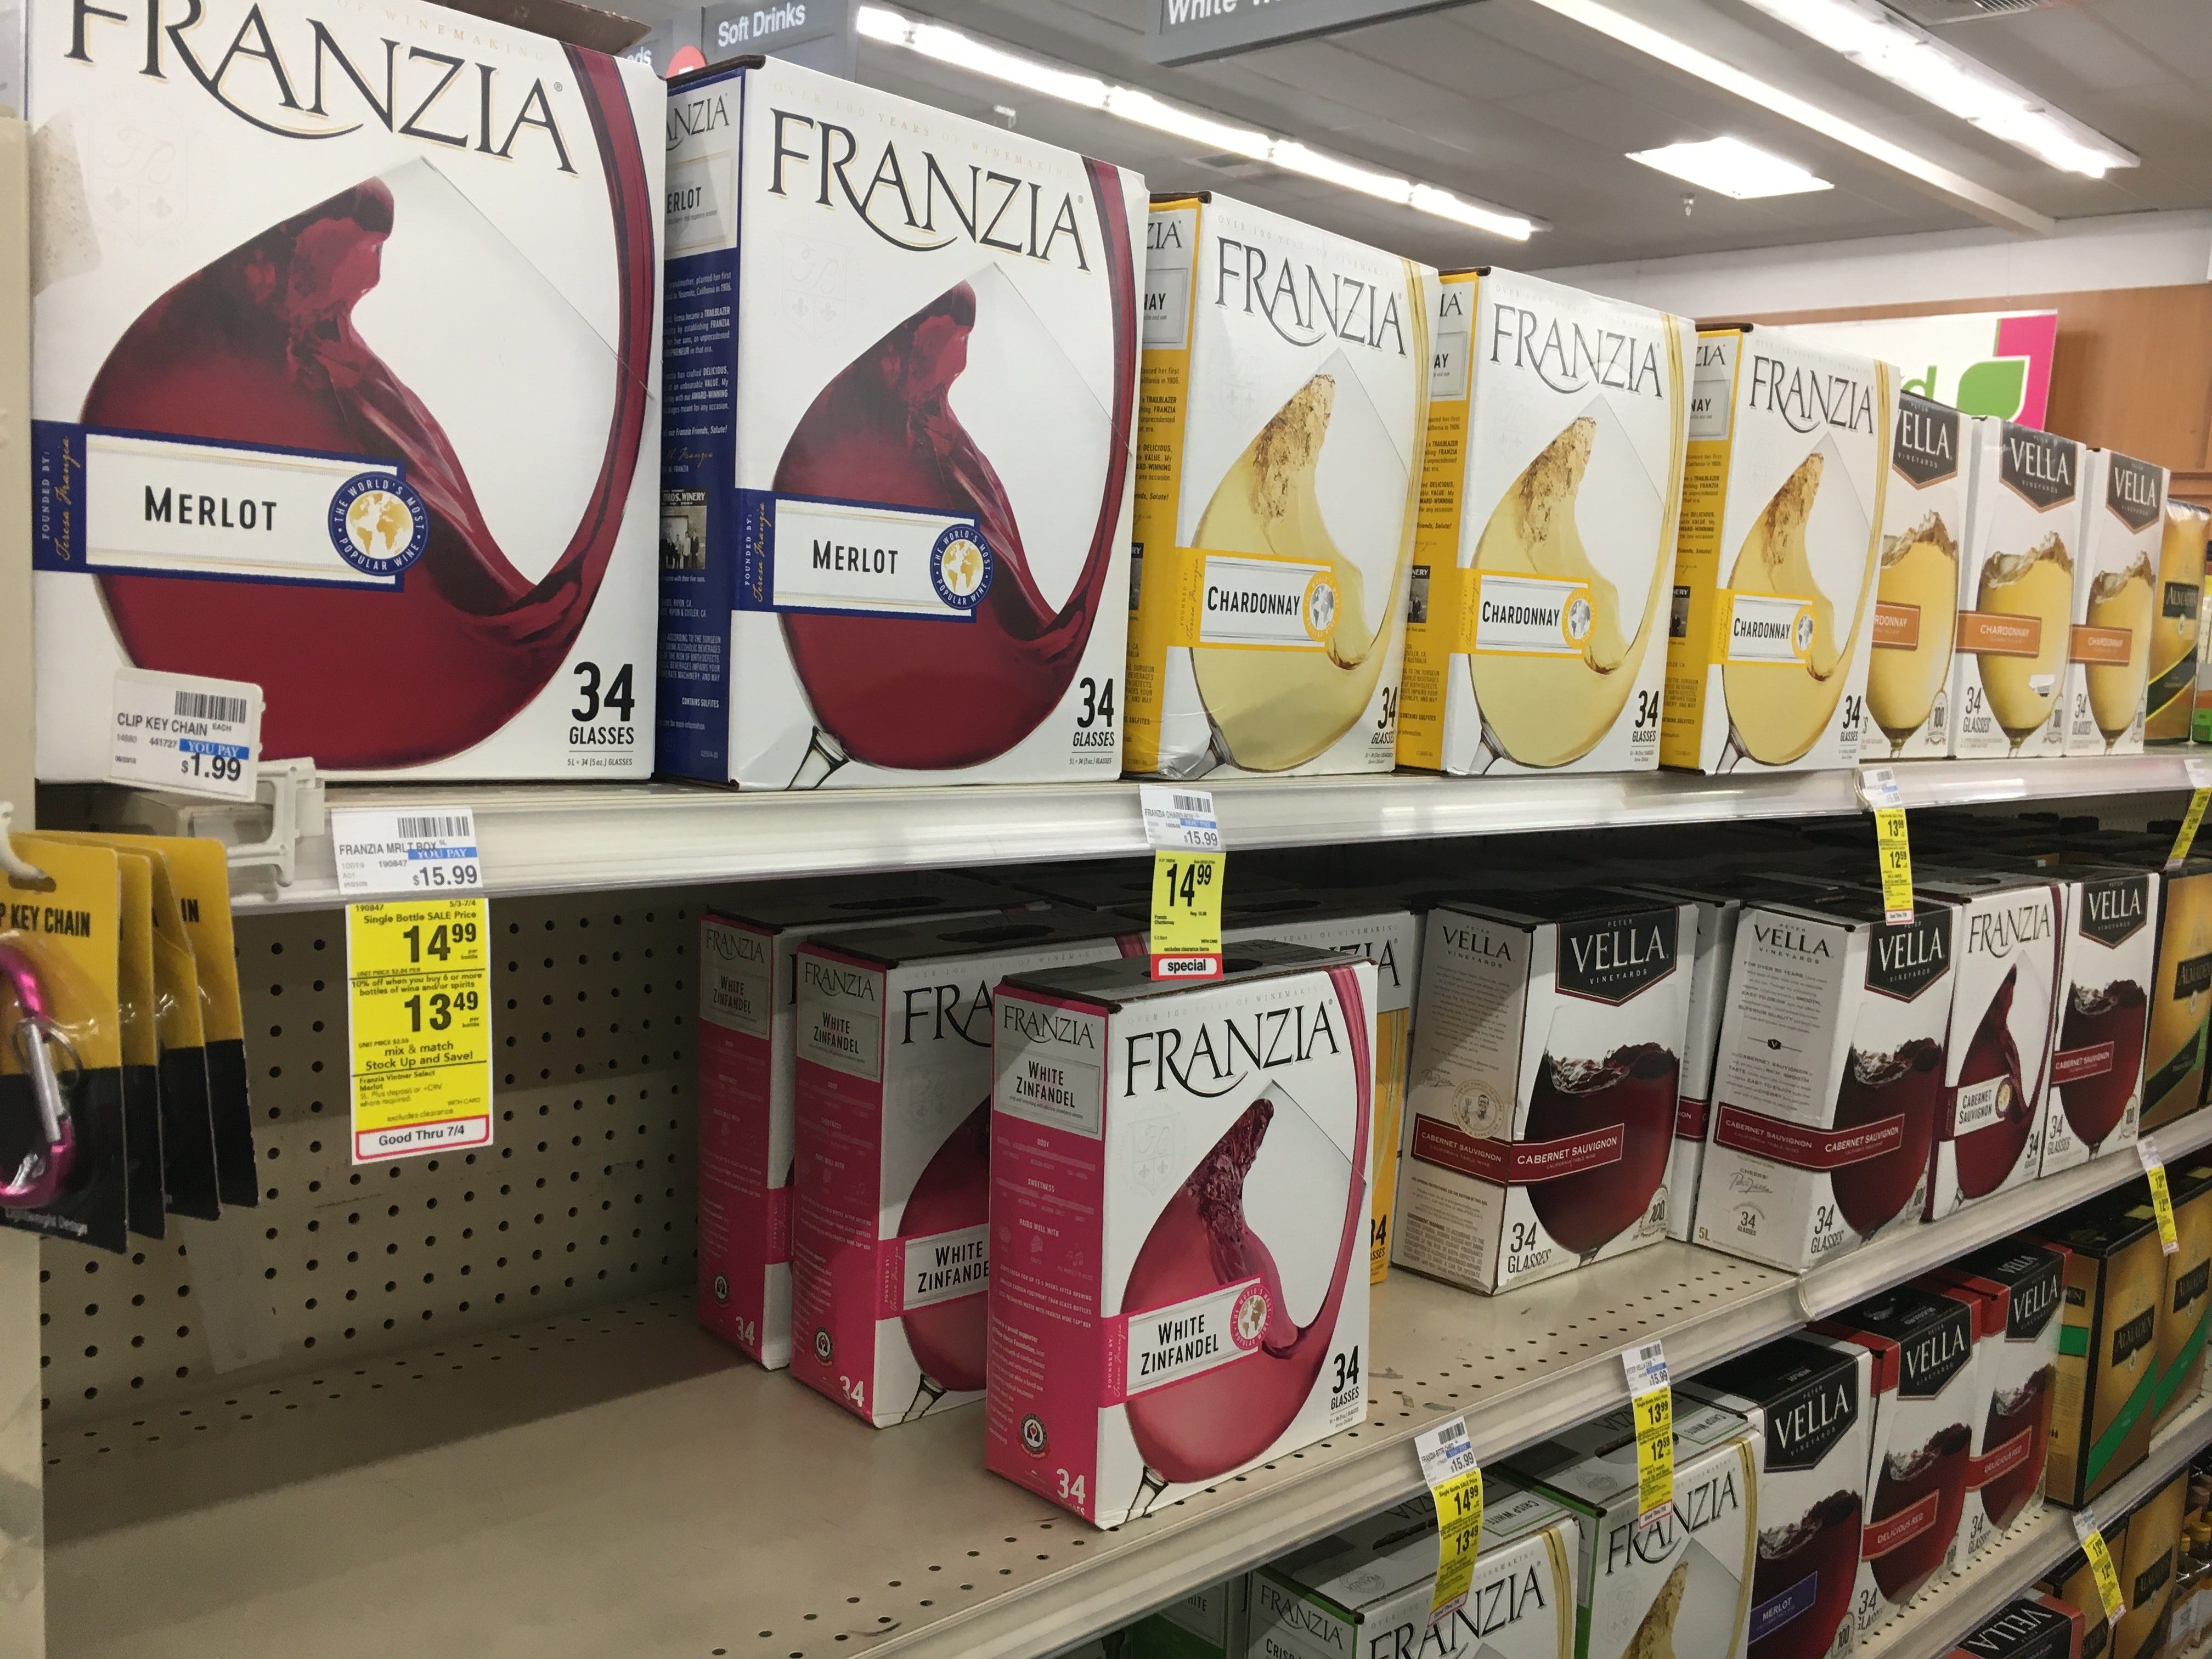 Boxed wine rises to the occasion with big sales growth during pandemic